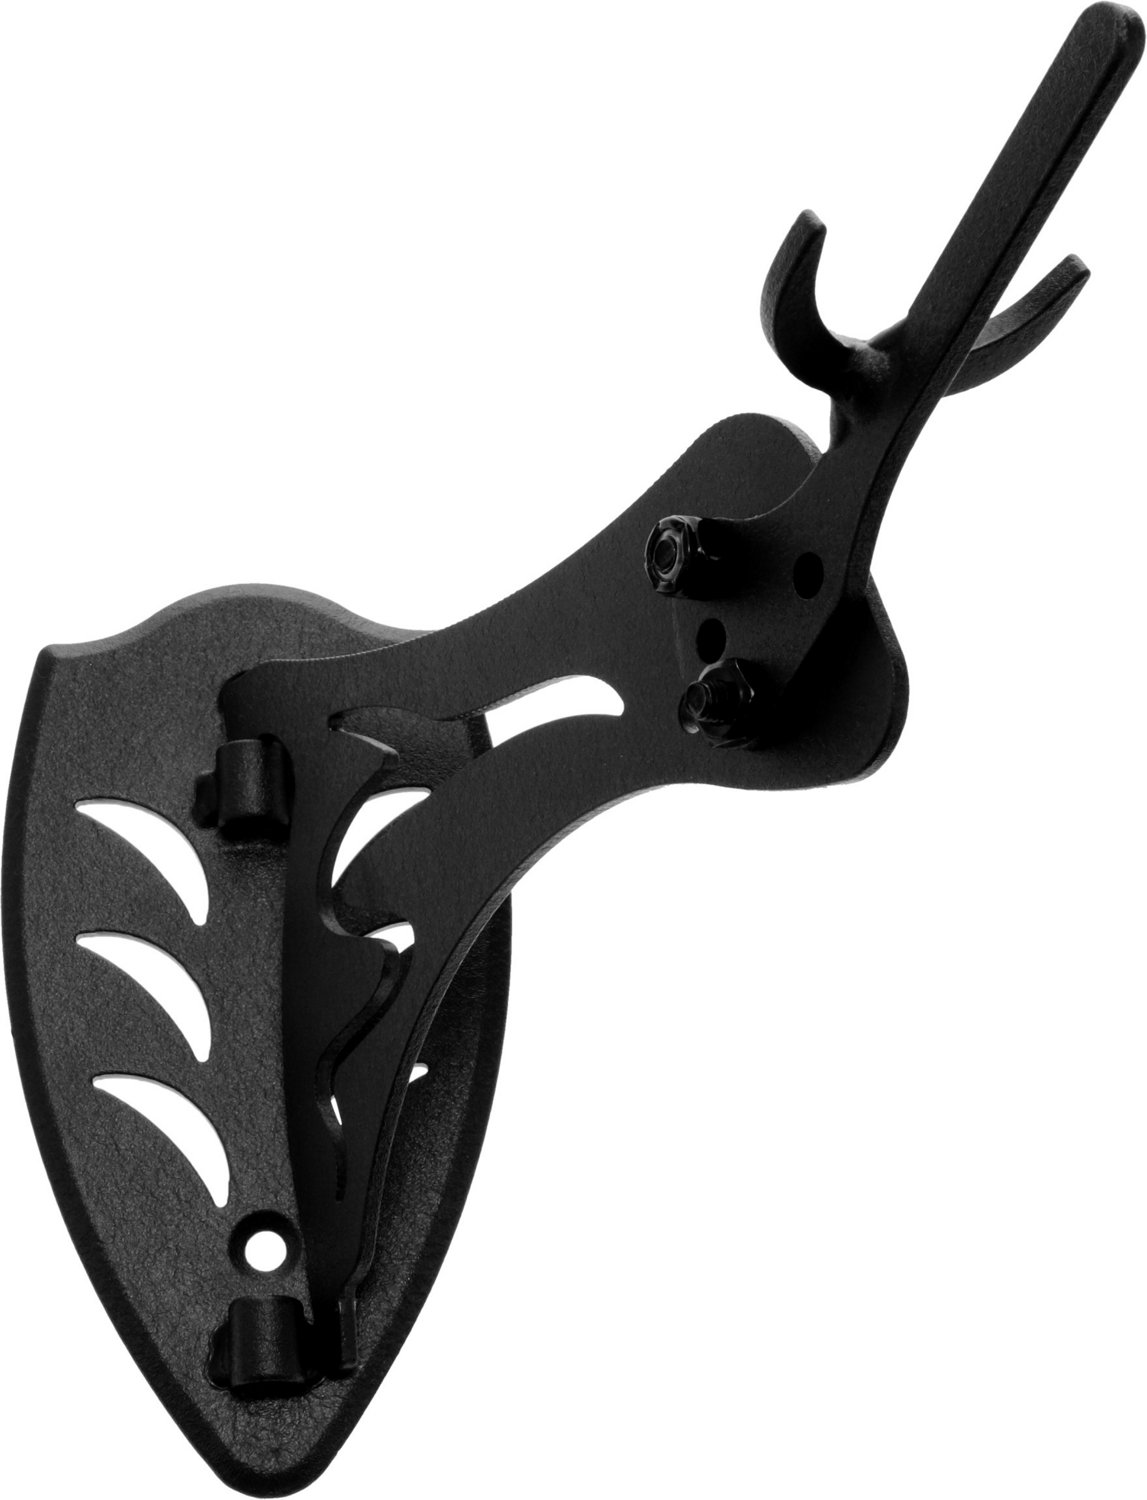 SkullHooker Trophy Tree  Free Shipping at Academy